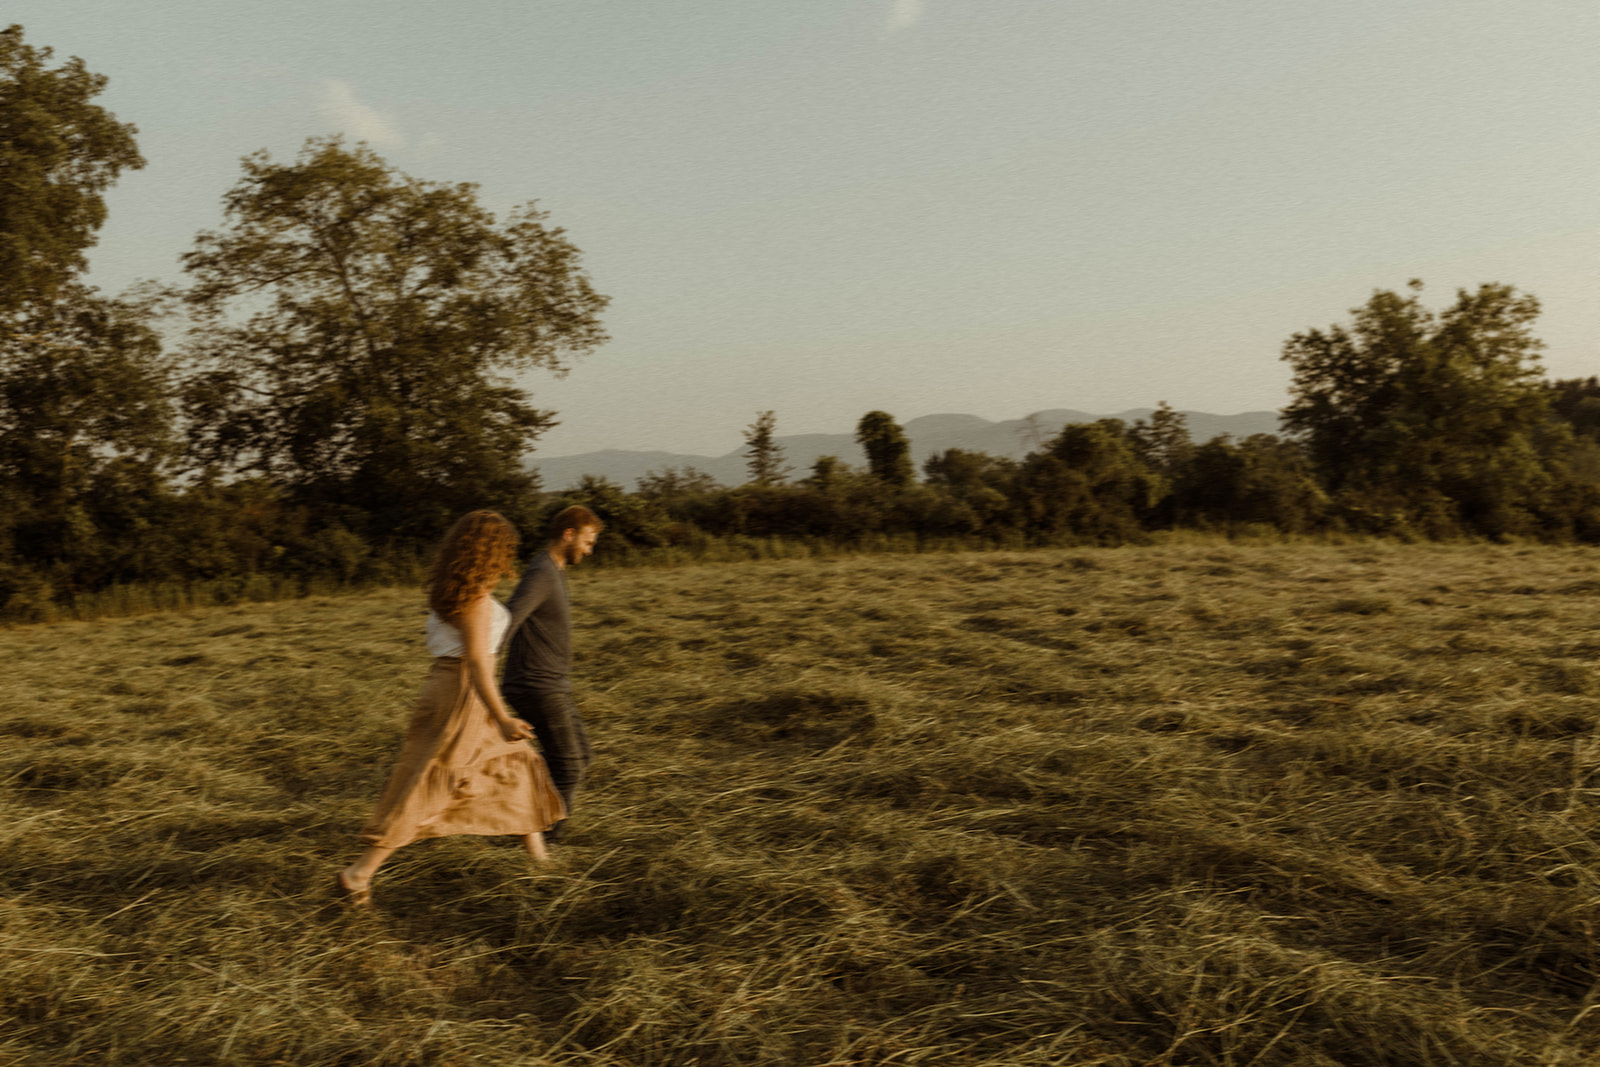 Couple running through open field in Upstate New York with golden hour light.